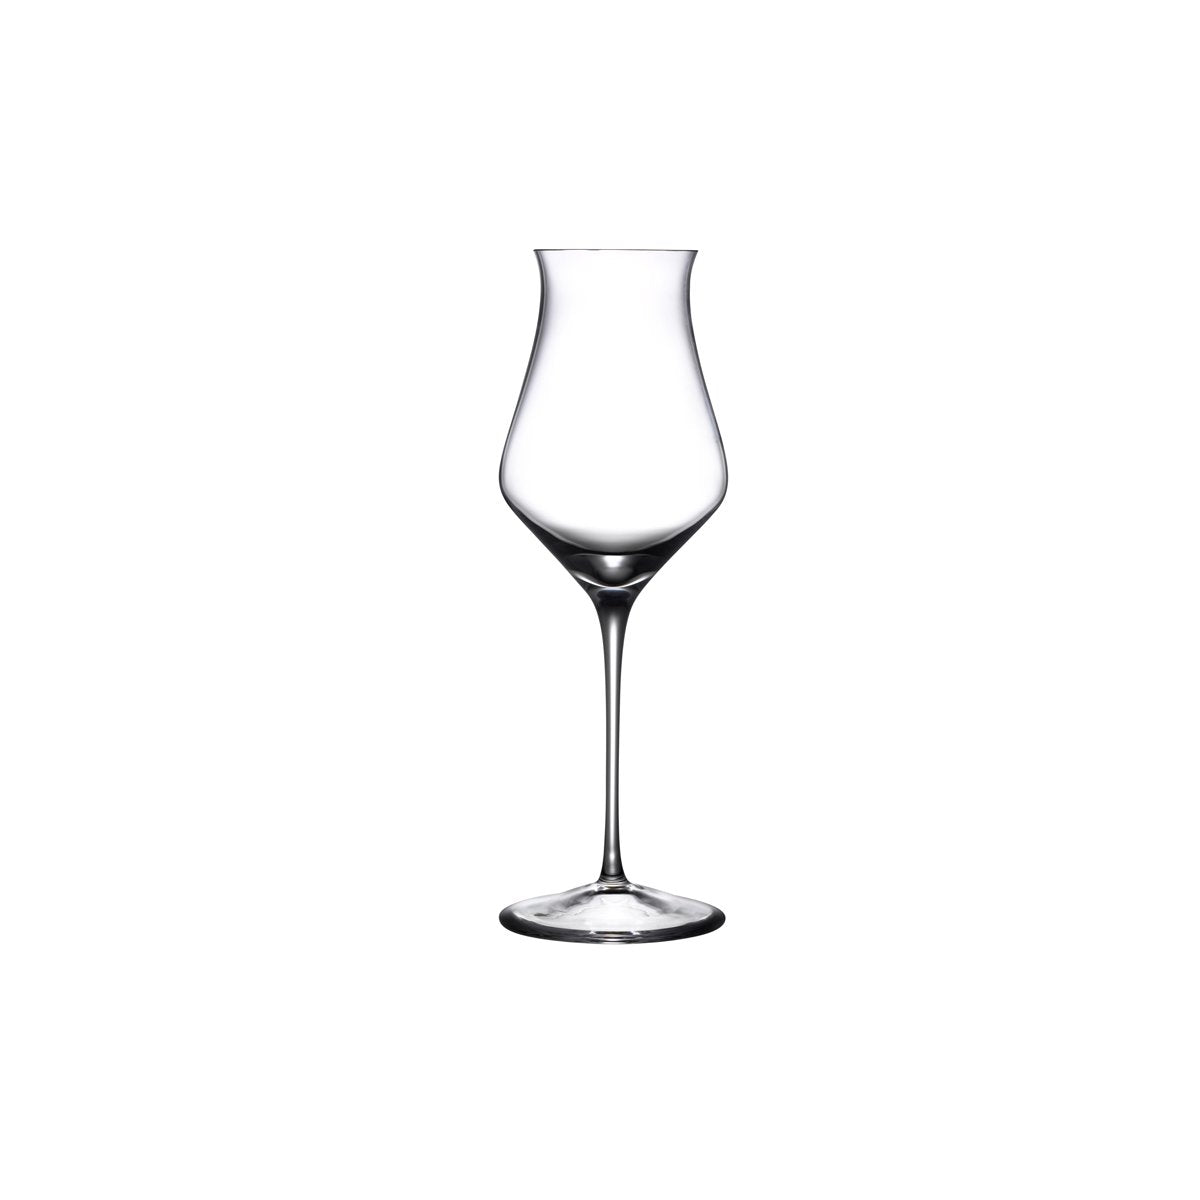 islands set of two whisky tasting glasses medium by nude at adorn.house